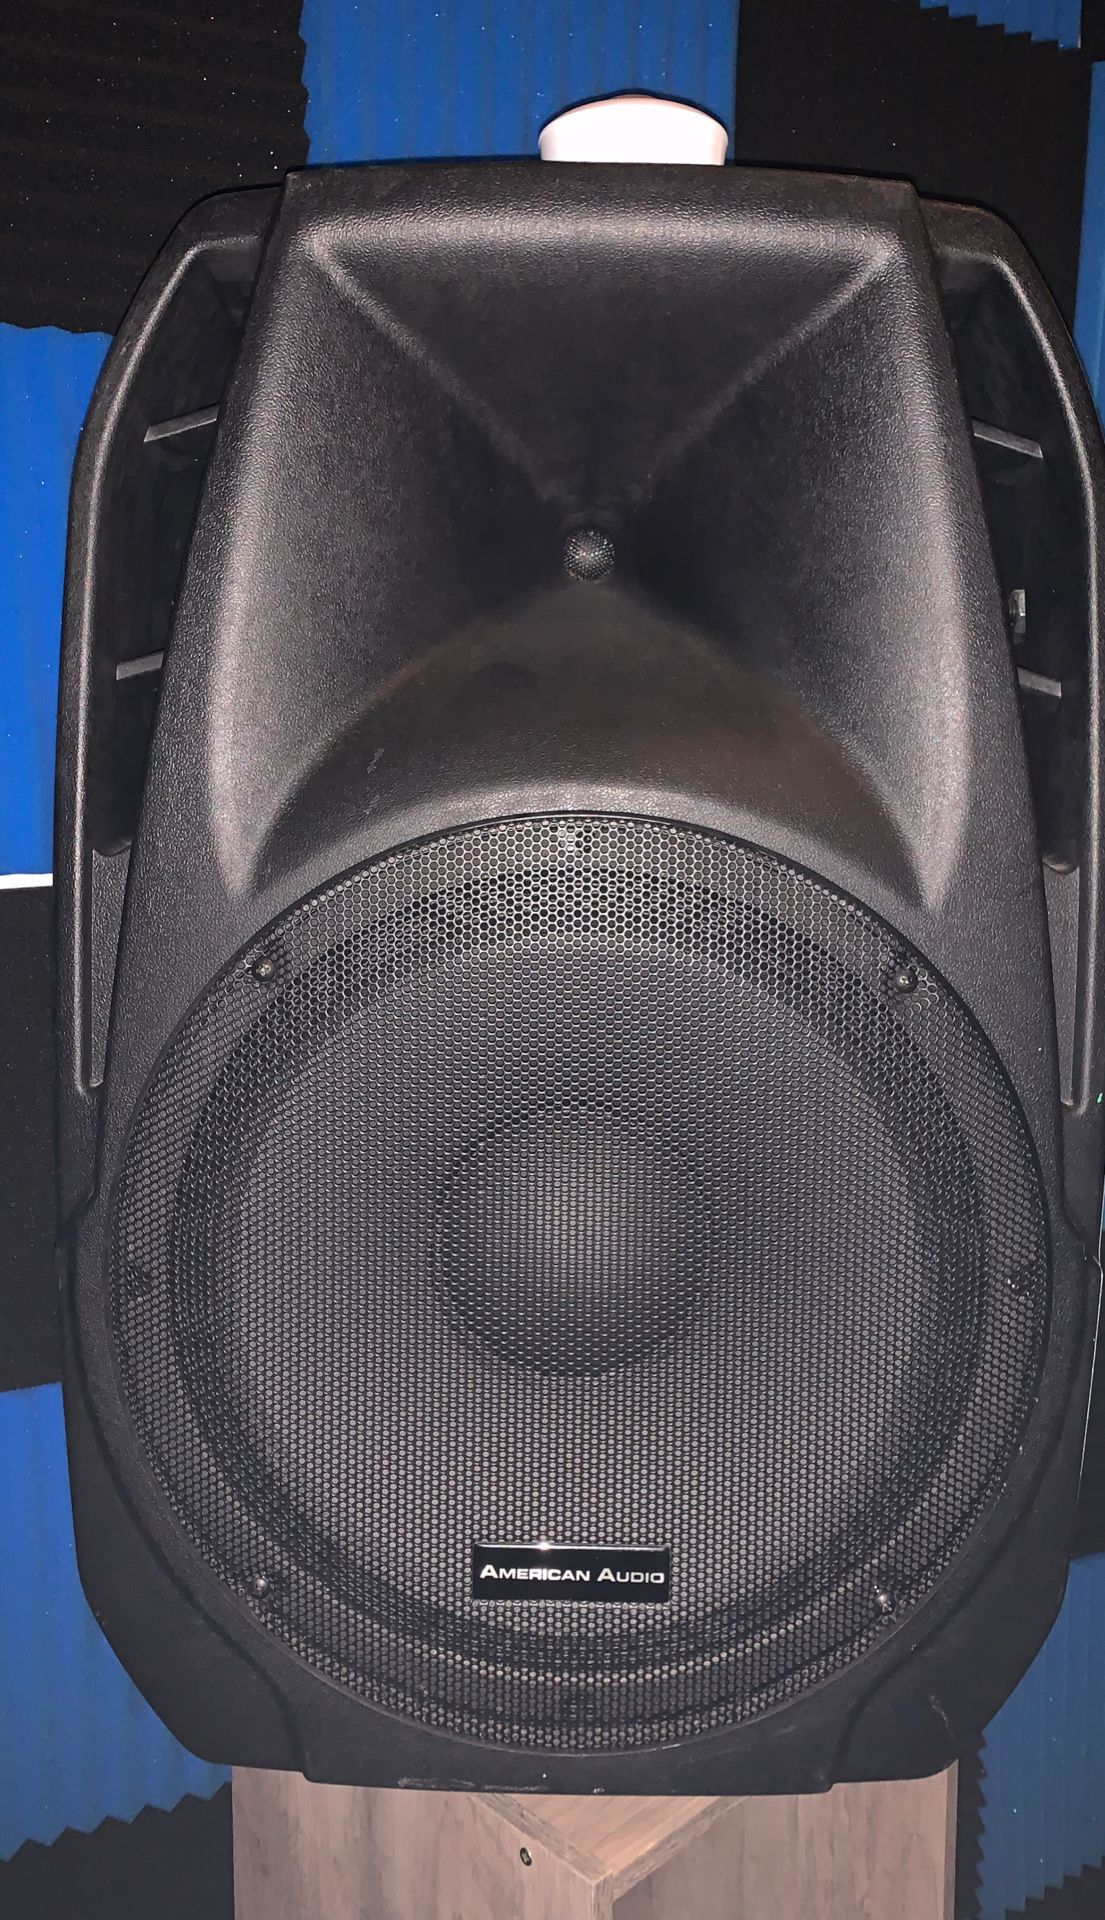 2 American Audio KPOW 15A Powered SPEAKERS $175